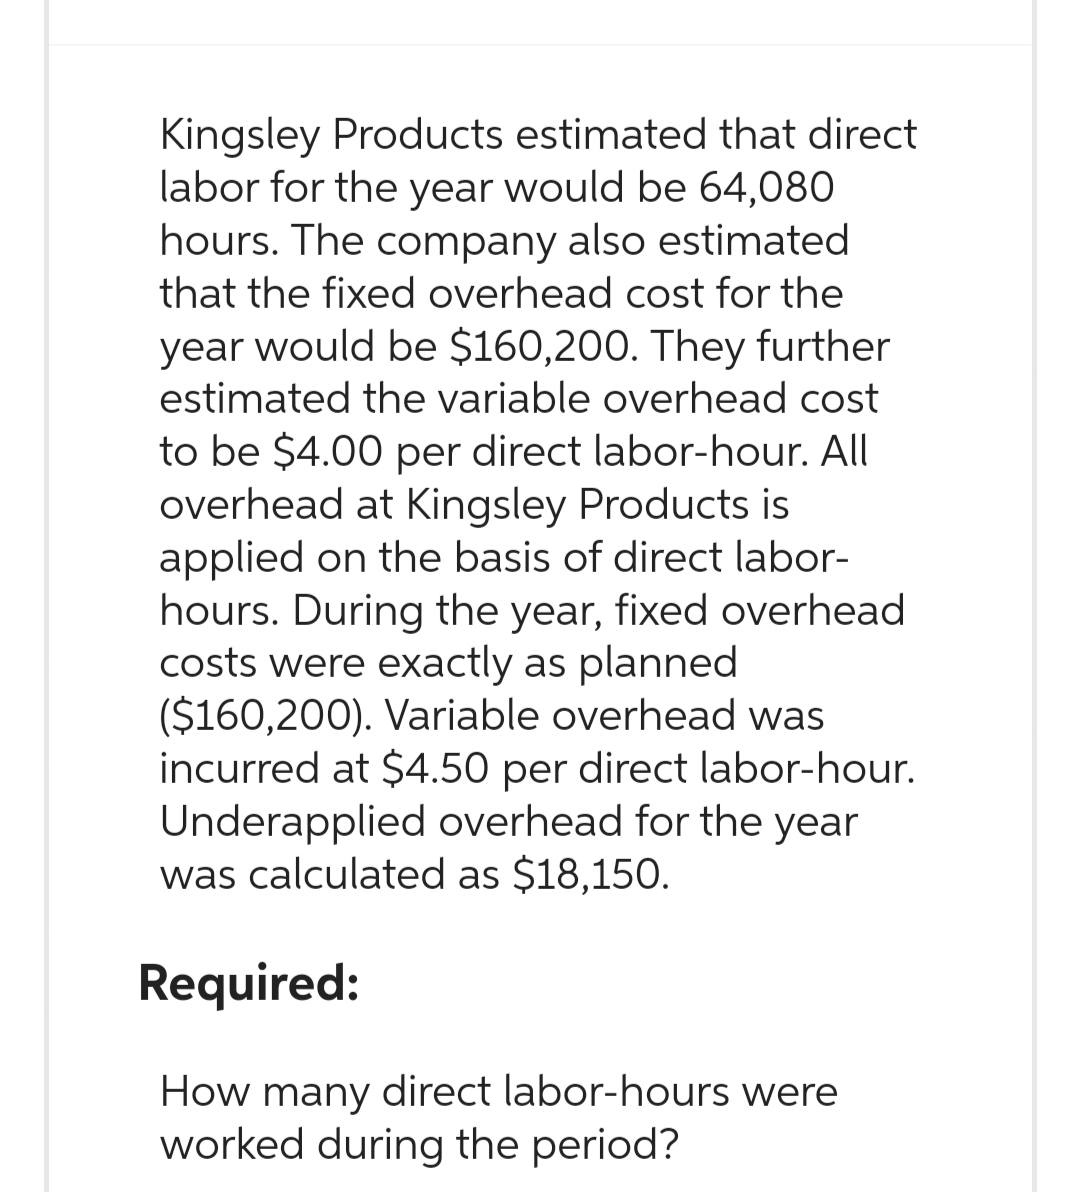 Kingsley Products estimated that direct.
labor for the year would be 64,080
hours. The company also estimated
that the fixed overhead cost for the
year would be $160,200. They further
estimated the variable overhead cost
to be $4.00 per direct labor-hour. All
overhead at Kingsley Products is
applied on the basis of direct labor-
hours. During the year, fixed overhead
costs were exactly as planned
($160,200). Variable overhead was
incurred at $4.50 per direct labor-hour.
Underapplied overhead for the year
was calculated as $18,150.
Required:
How many direct labor-hours were
worked during the period?